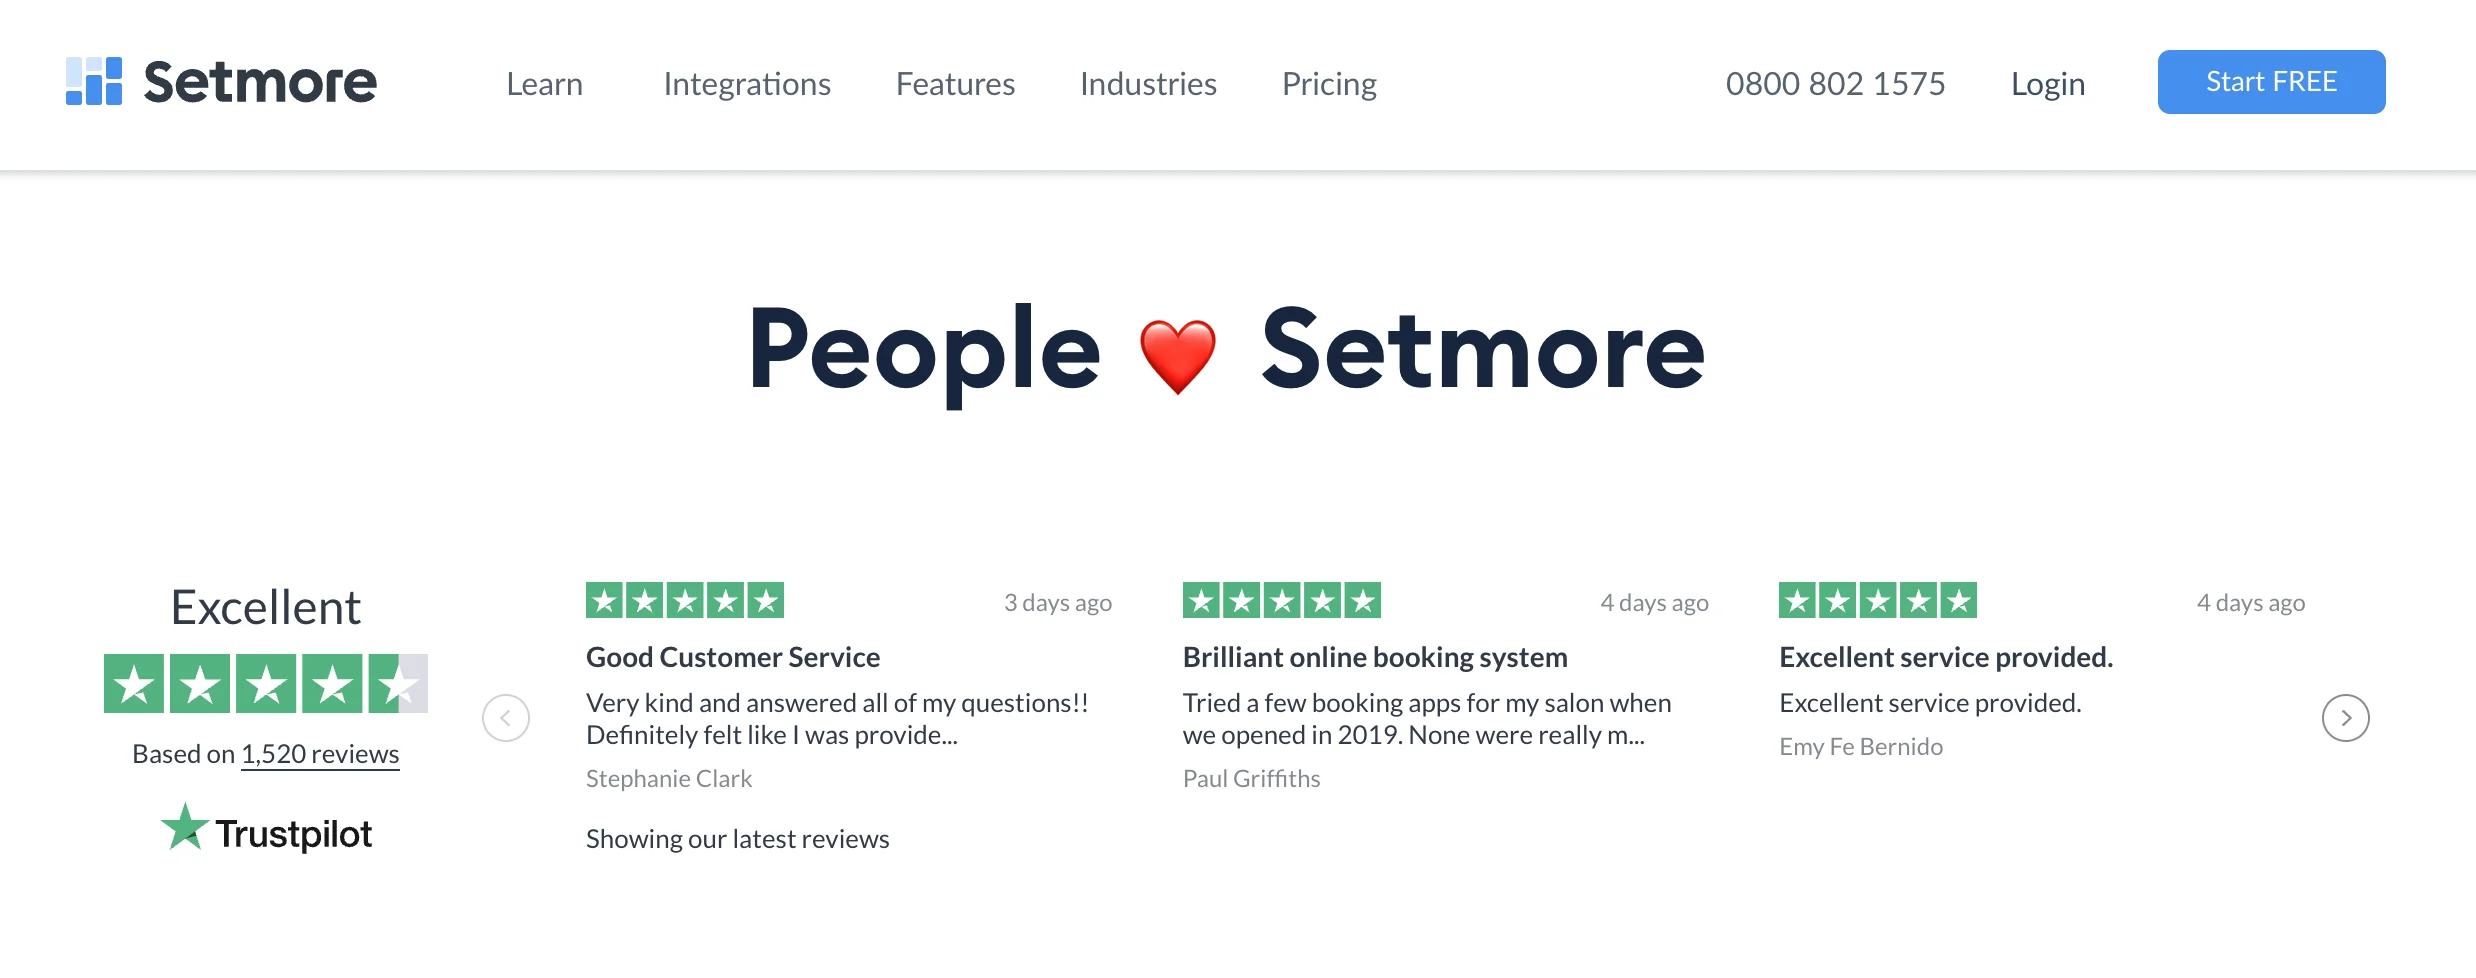 Trustpilot reviews can be found lower down on the website’s homepage too.